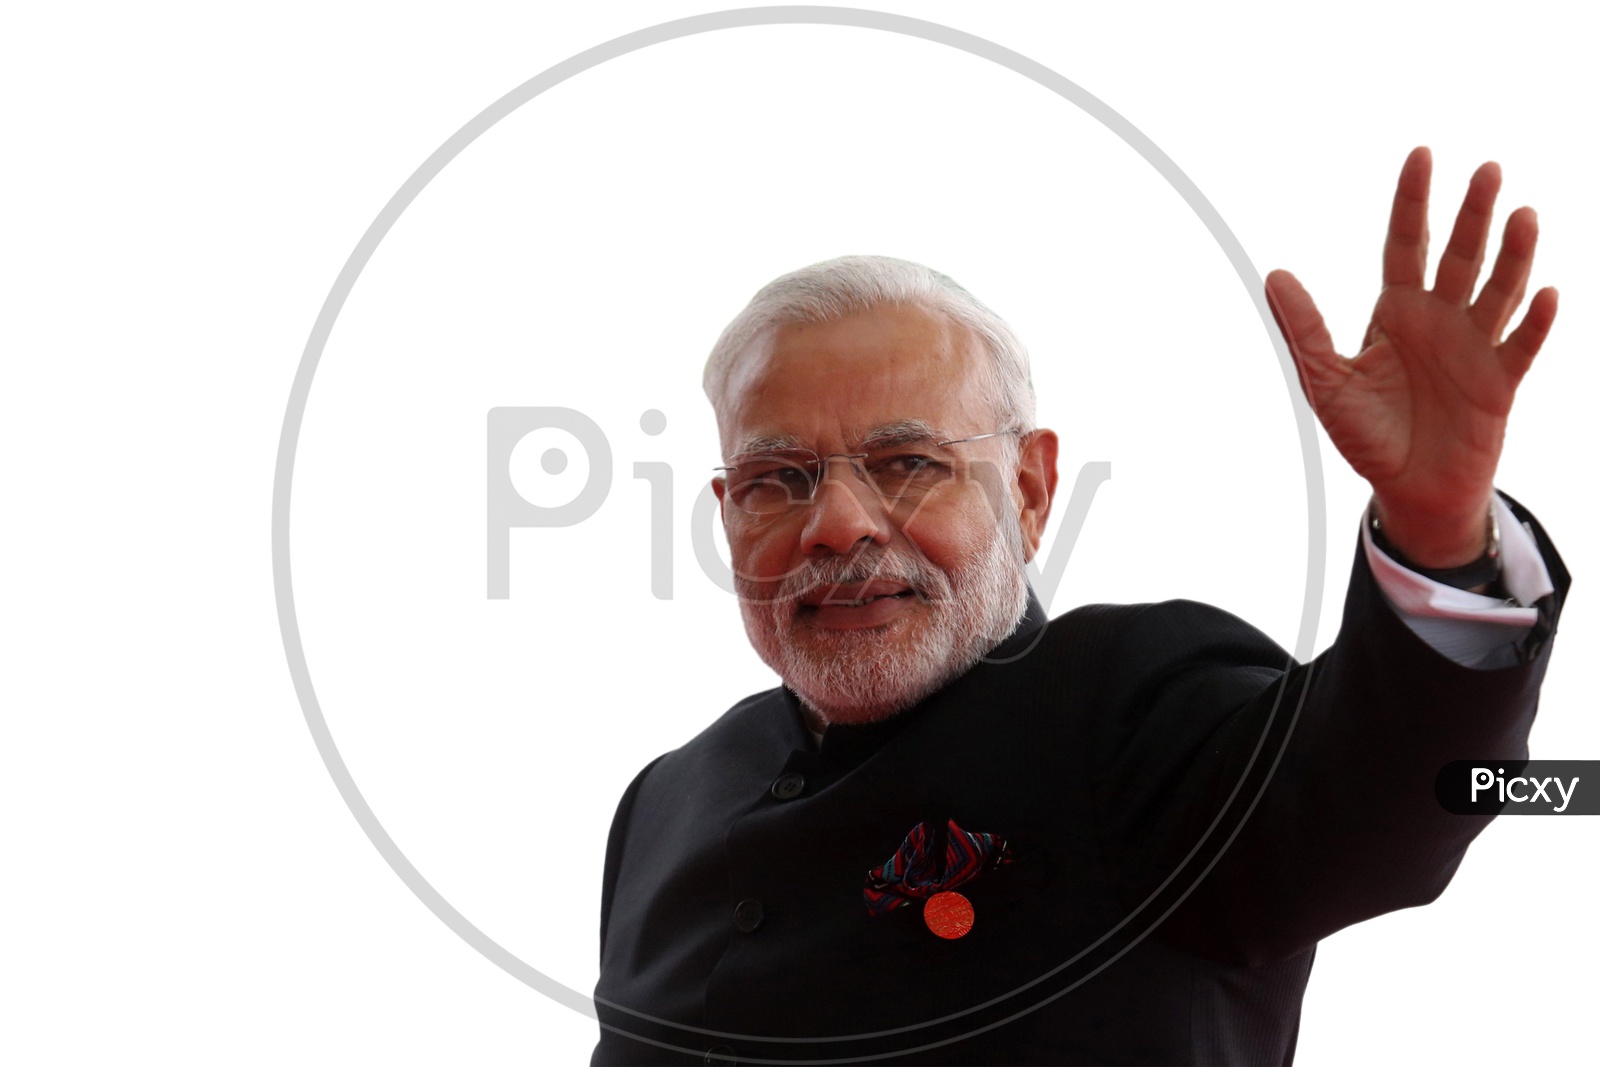 Narendra Modi, The Prime Minister of India waving his hand at supporters with white background